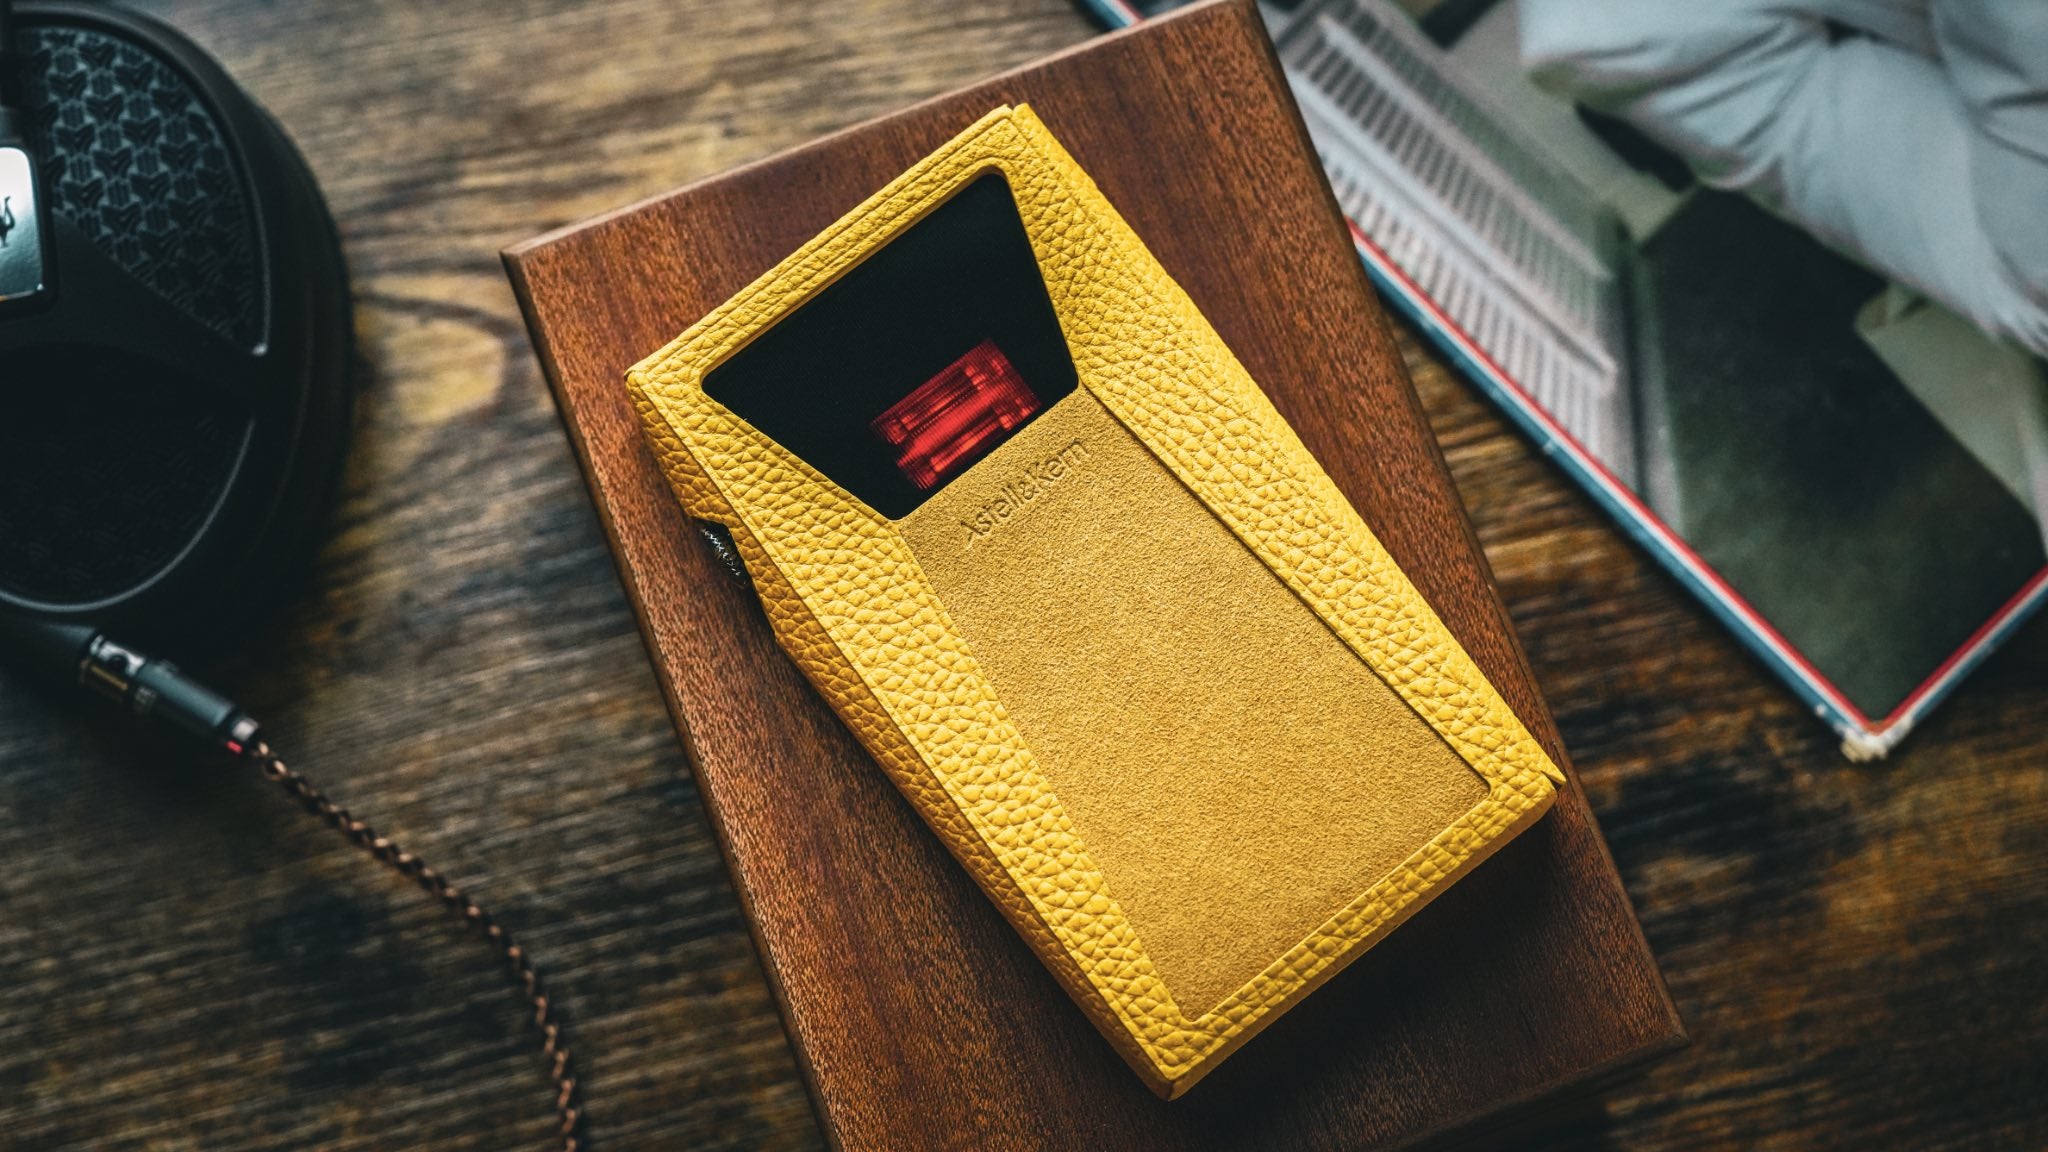 SP3000T in yellow calfskin case on included wood case